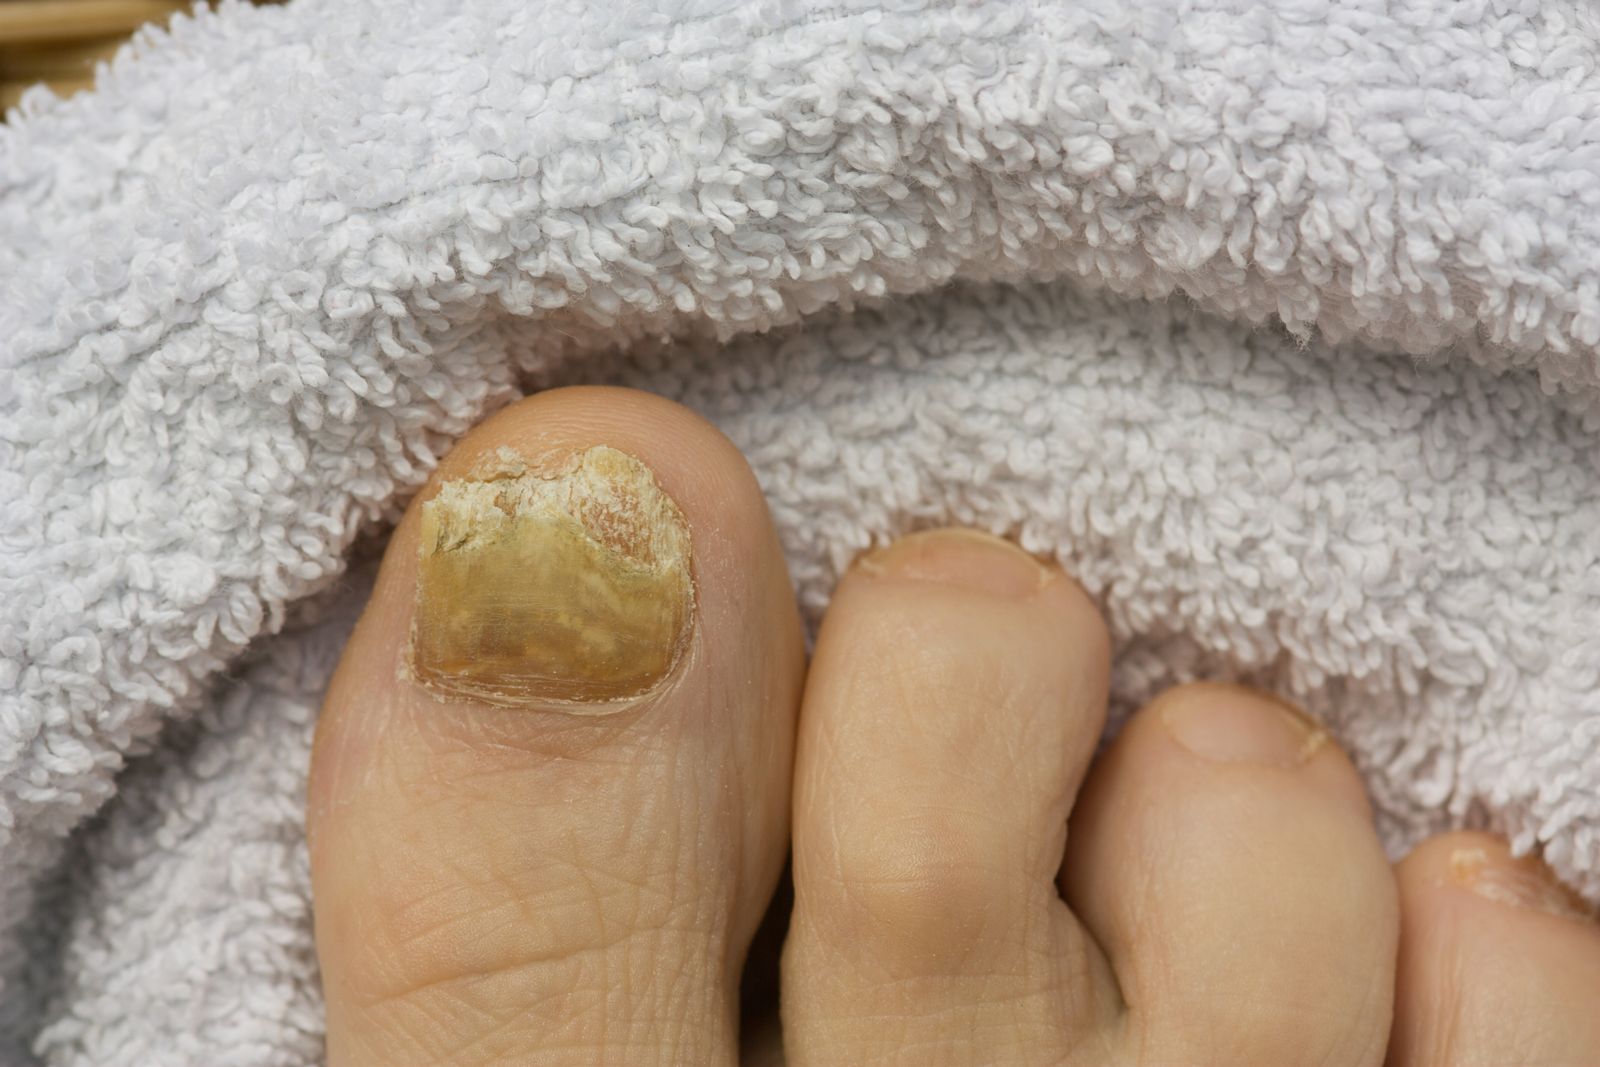 If I get my toenail removed, will the fungal nail grow ...